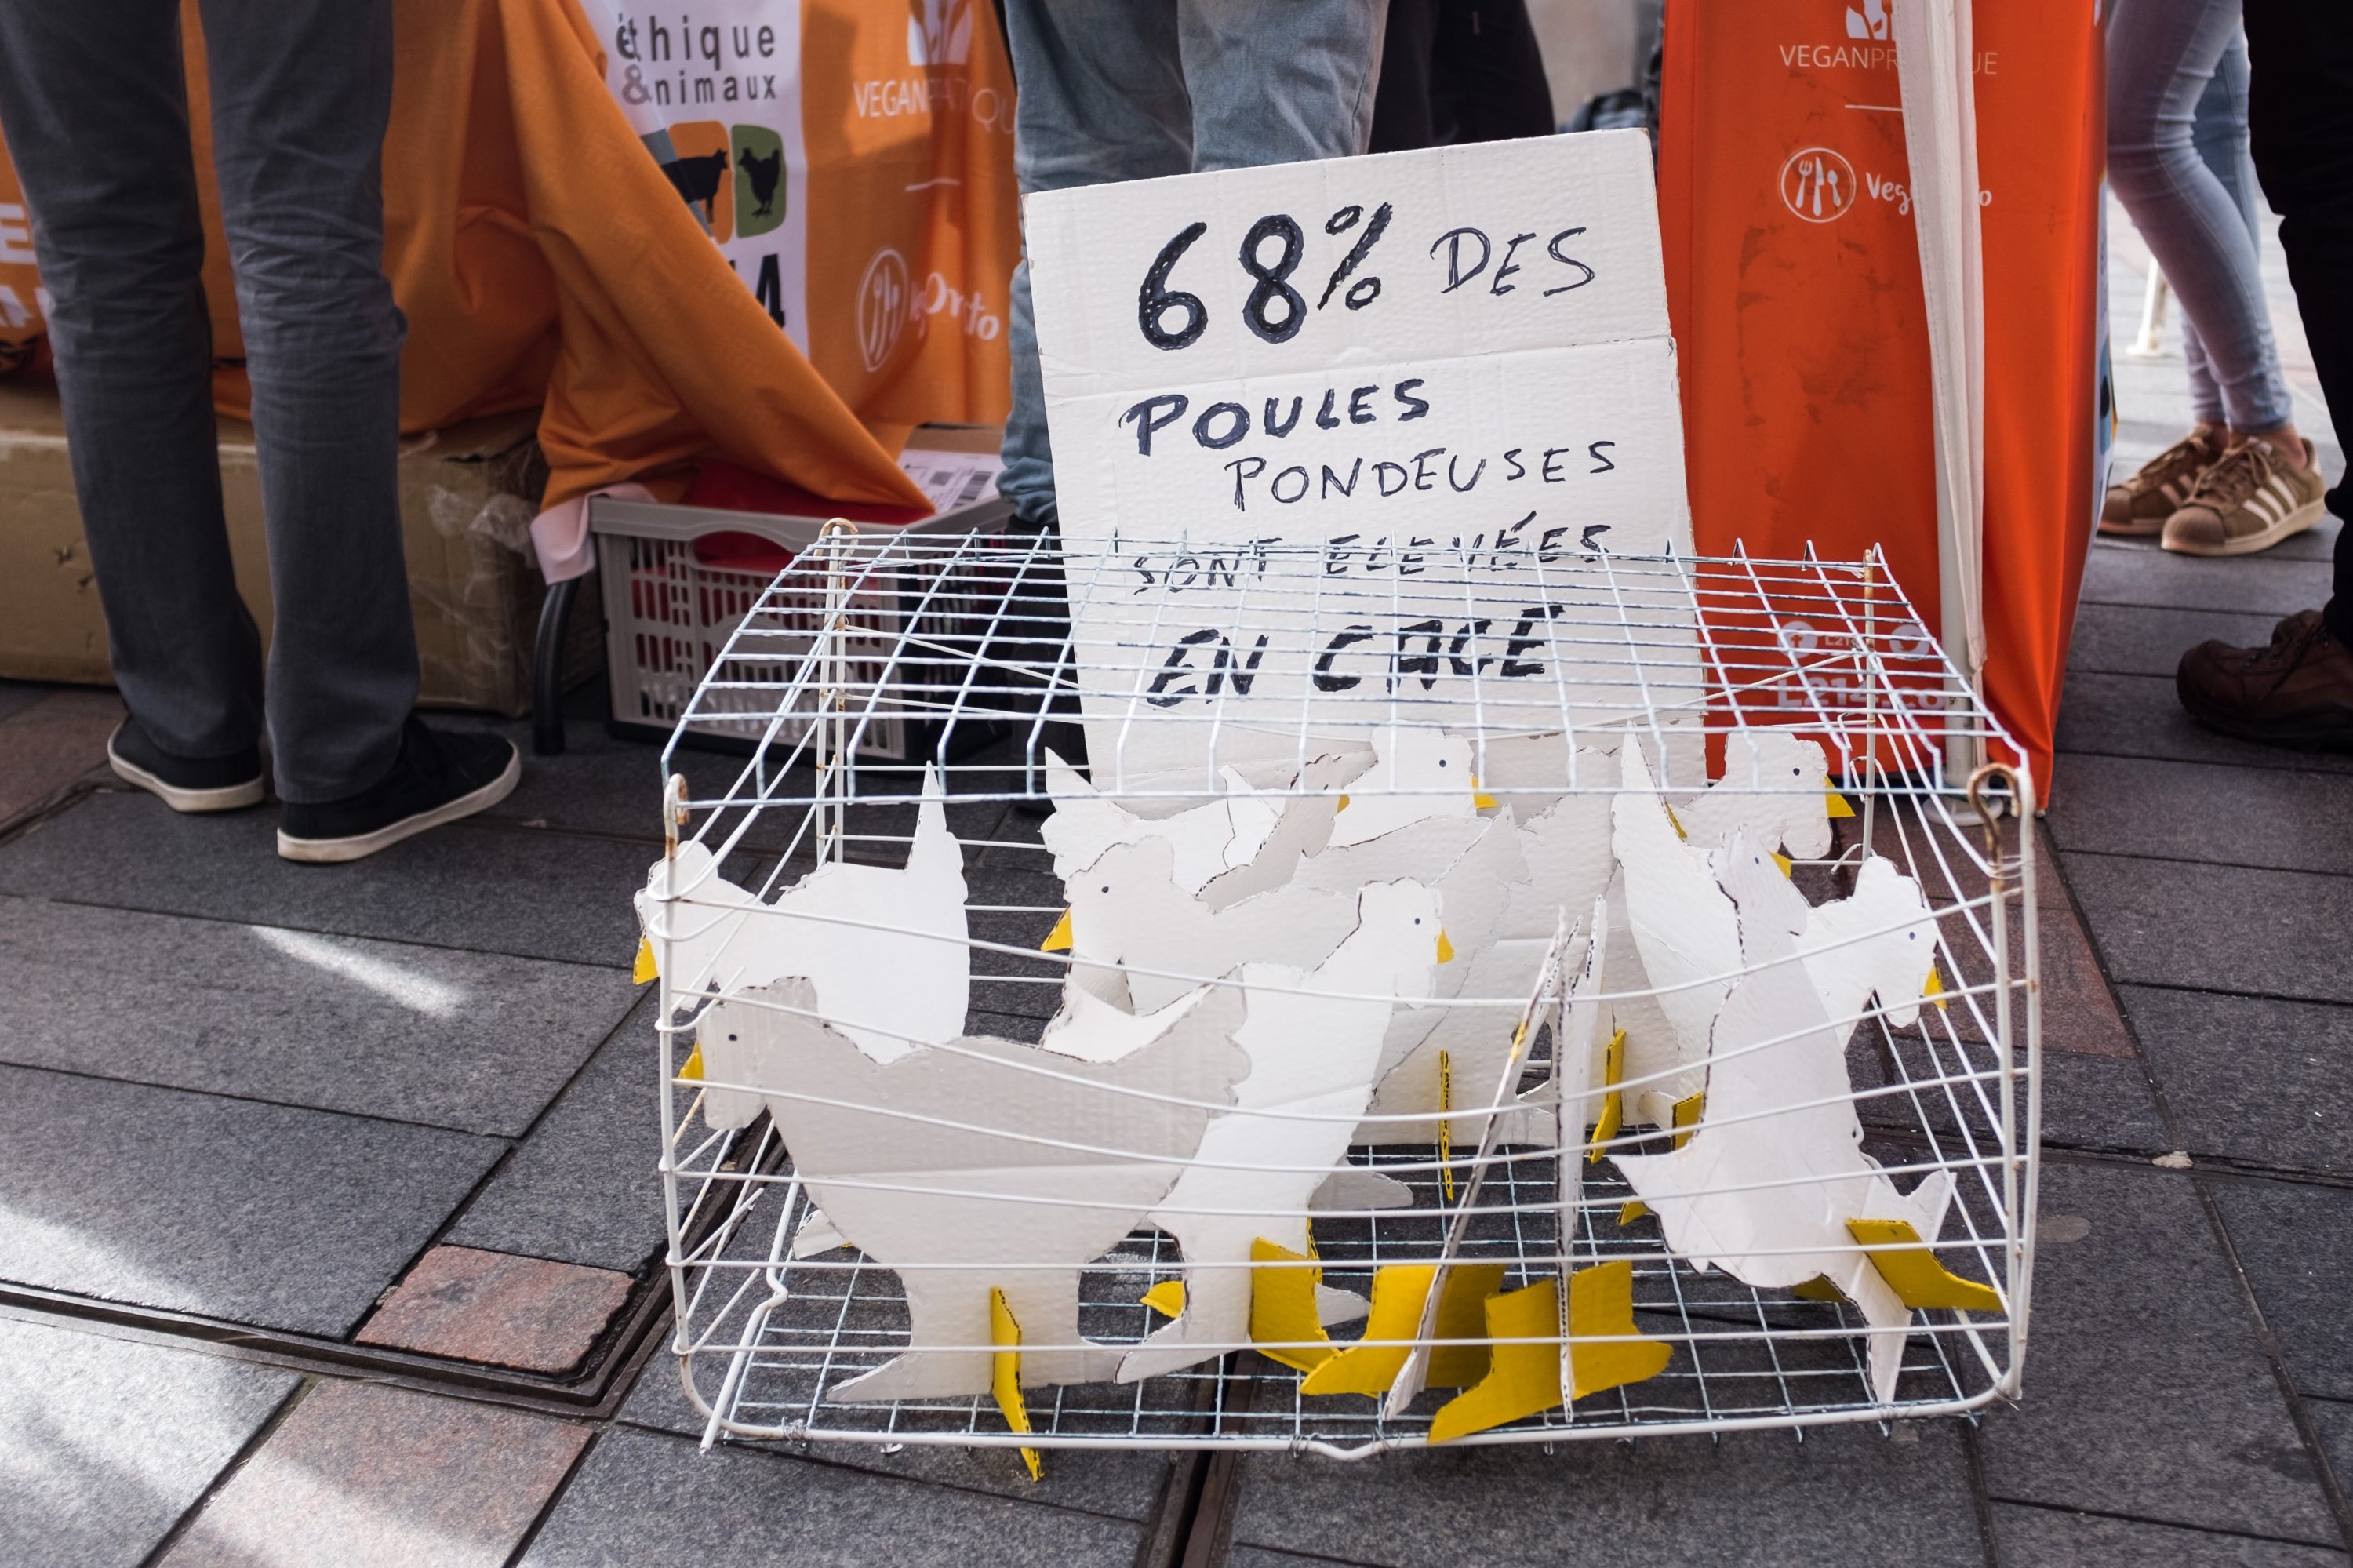 A model representing caged hens with a sign that reads '68% of layer hens are kept in a cage' is seen in this photo taken during a protest in Toulouse, France, Feb. 17, 2018. (Reuters File Photo)